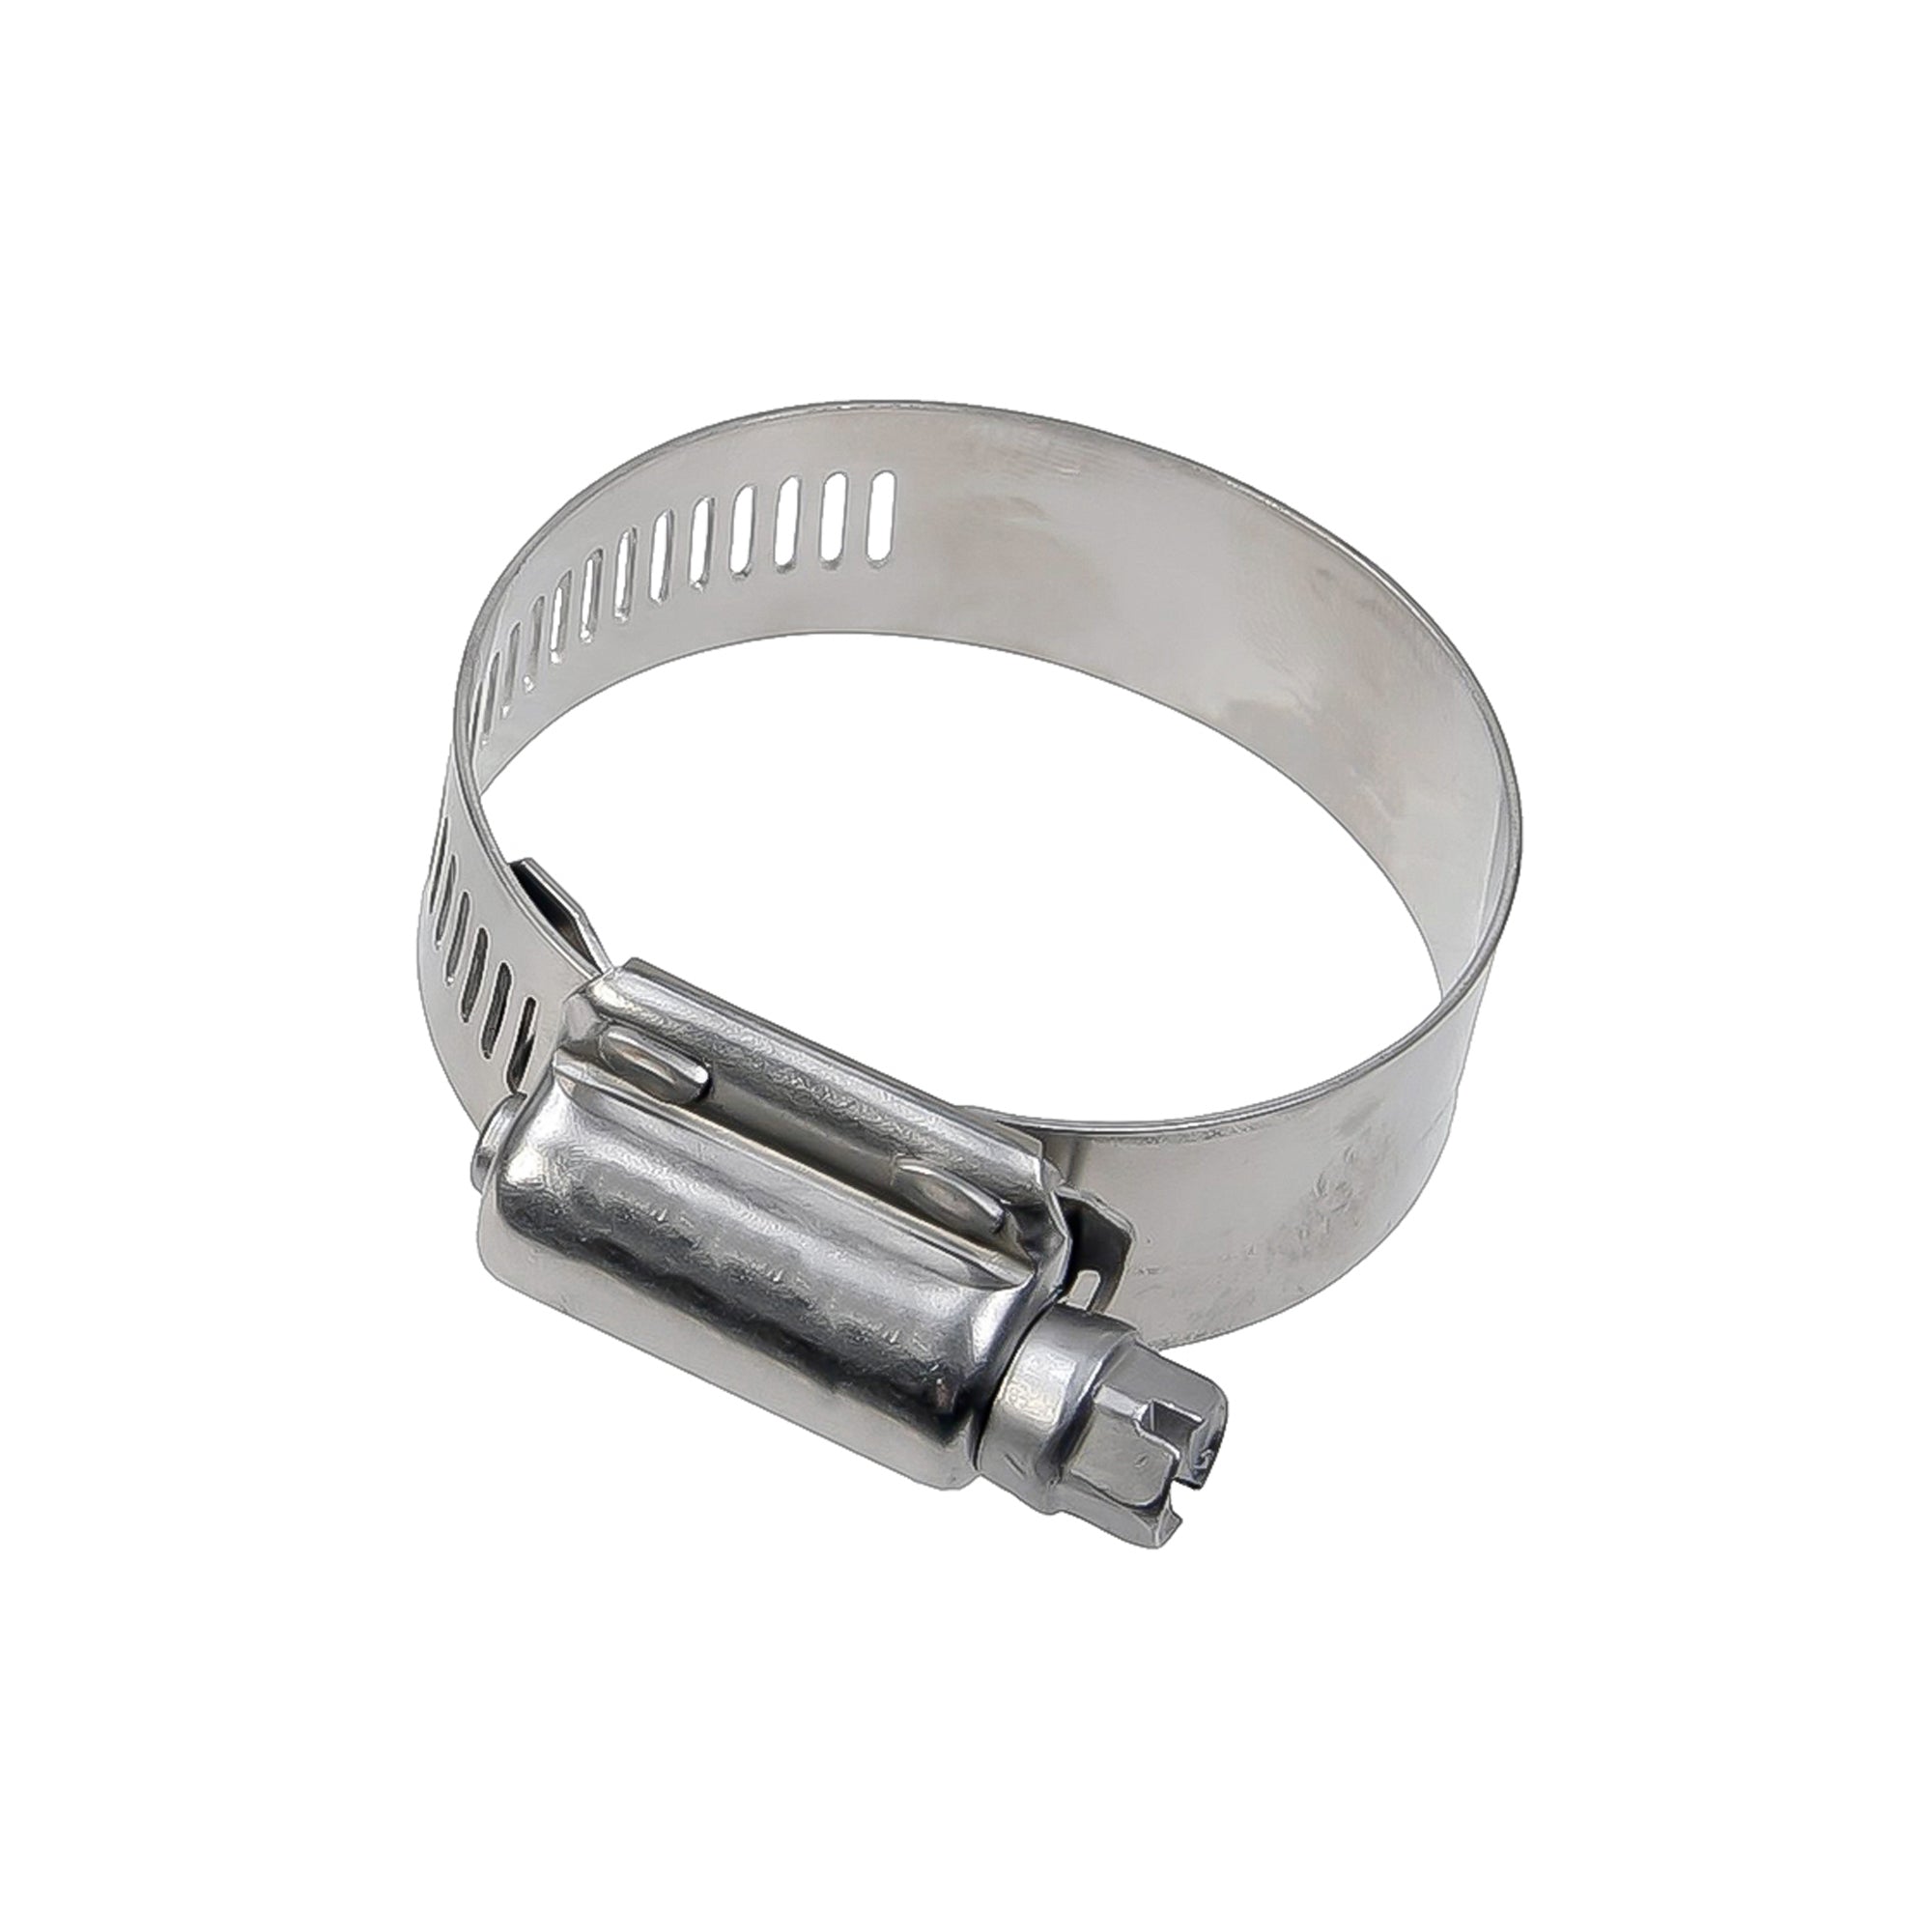 Hose Clamp 6 -12mm (1/4-Inch - 1/2-Inch), Stainless Steel - FO2325